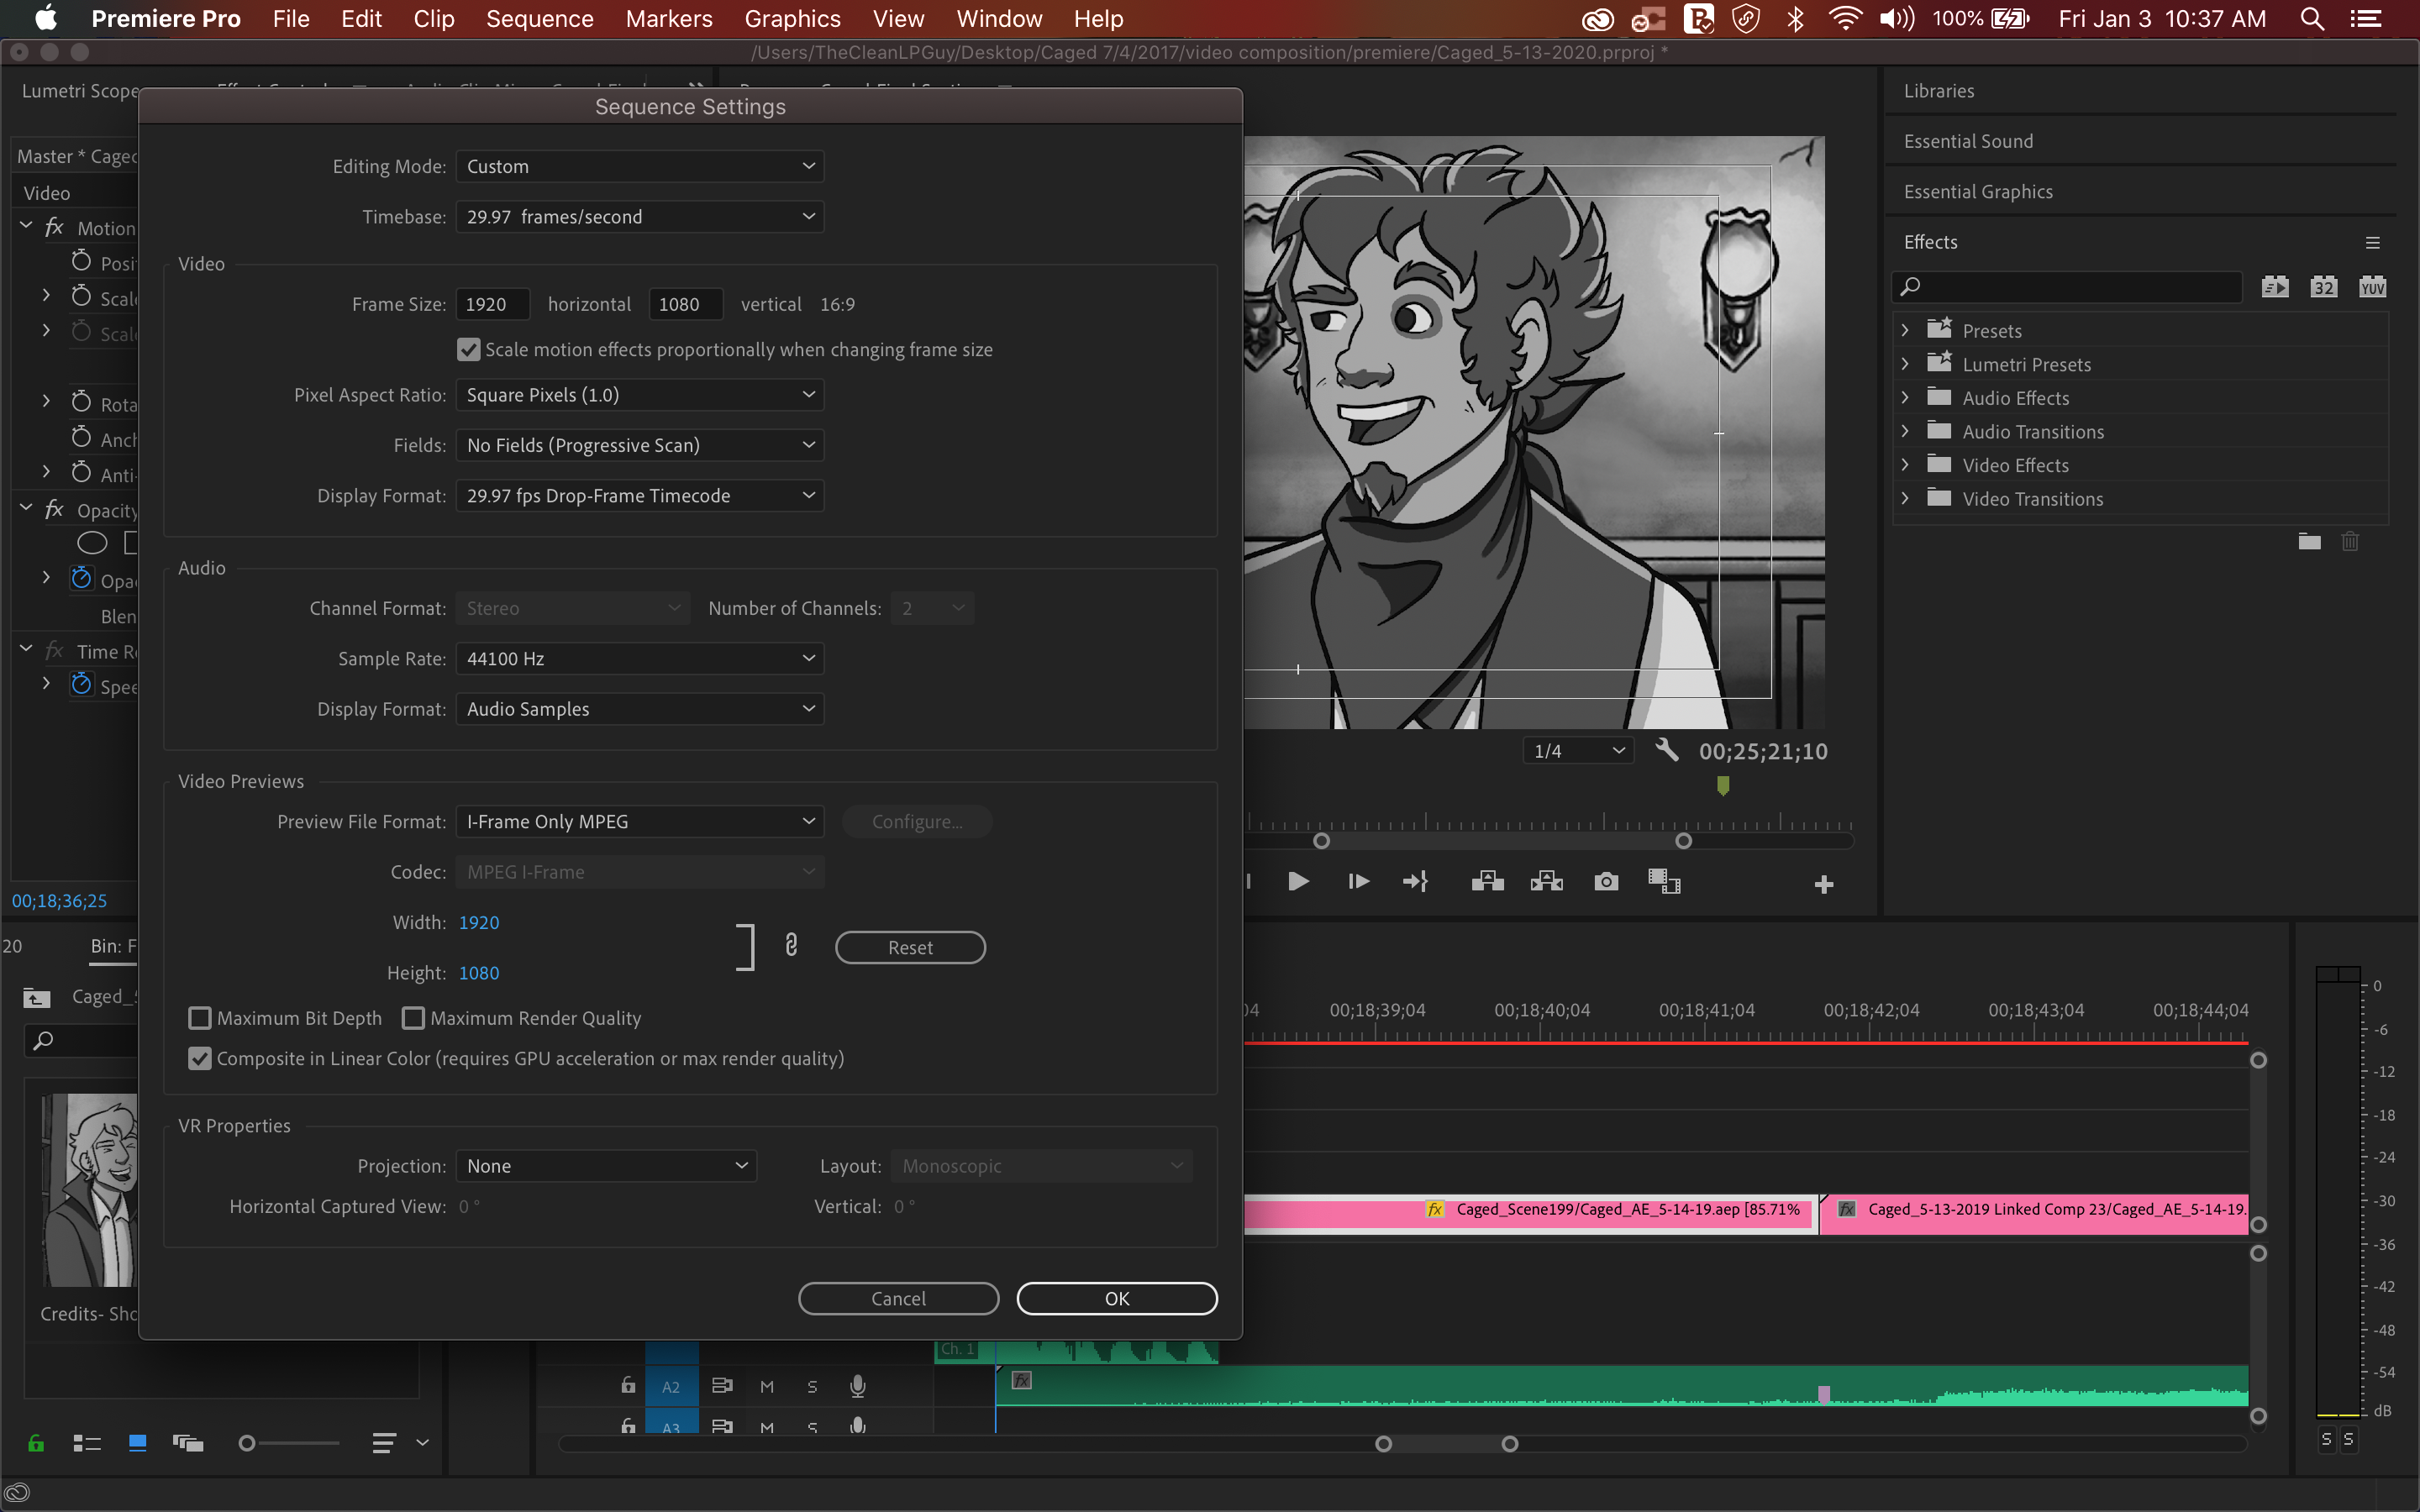 Solved: Premiere Pro/After Effects Composition Workflow - Adobe Support ...